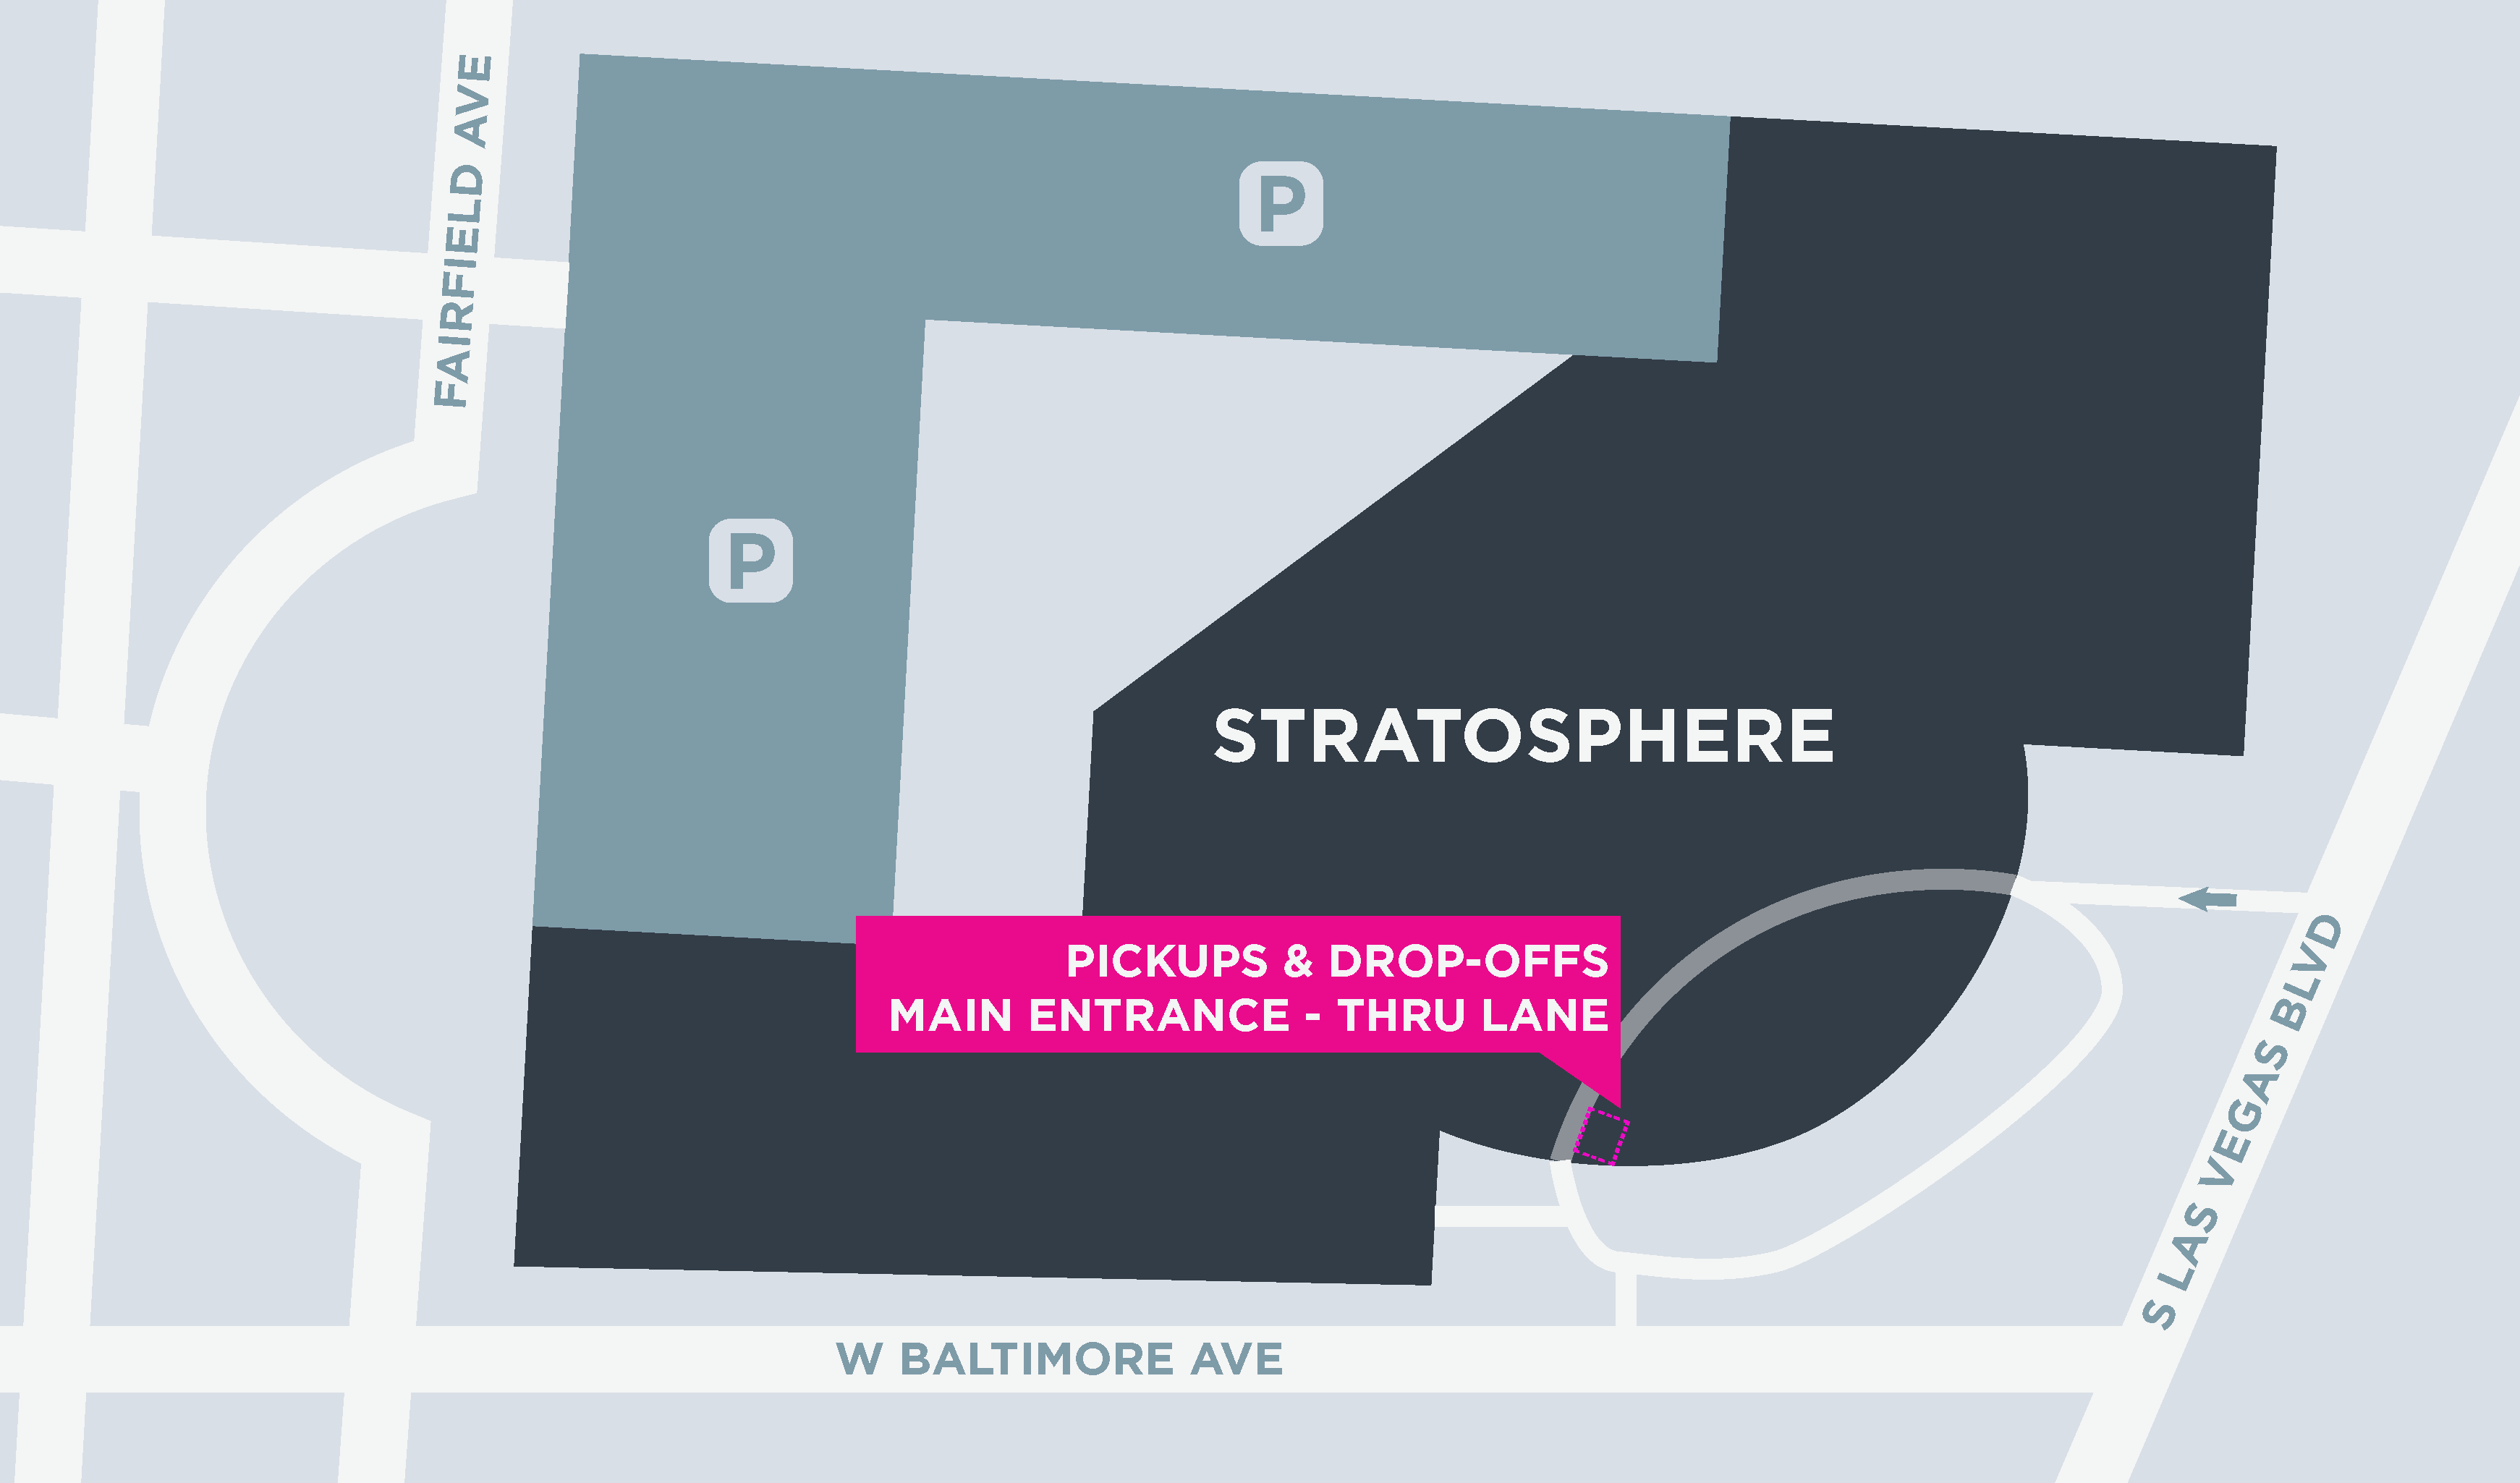 This image shows a map of the Stratosphere, including pickup and dropoff areas.